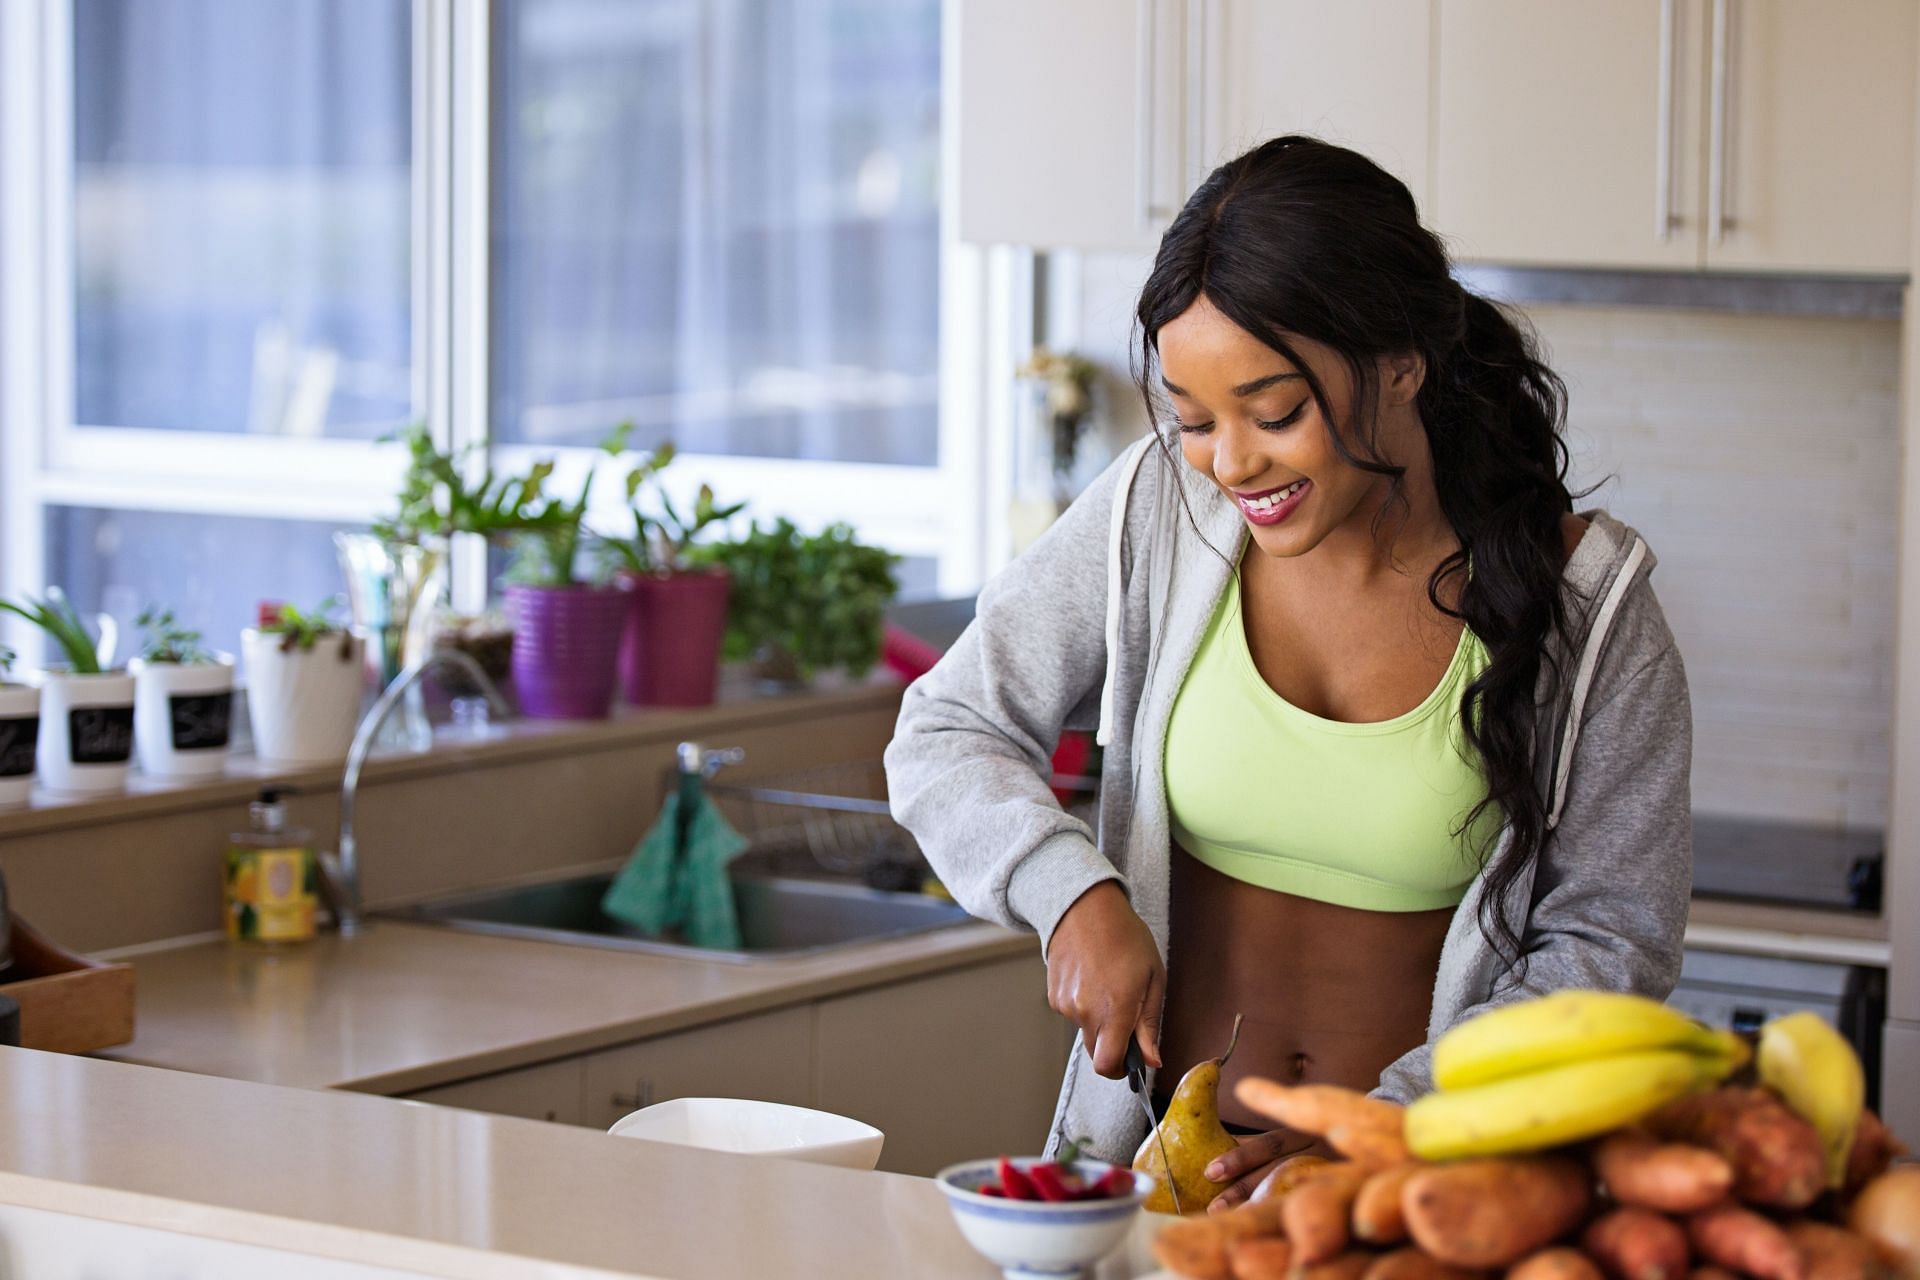 Lifestyle changes can help with insulin resistance. (Image via Pexels/ Nathan Cowley)